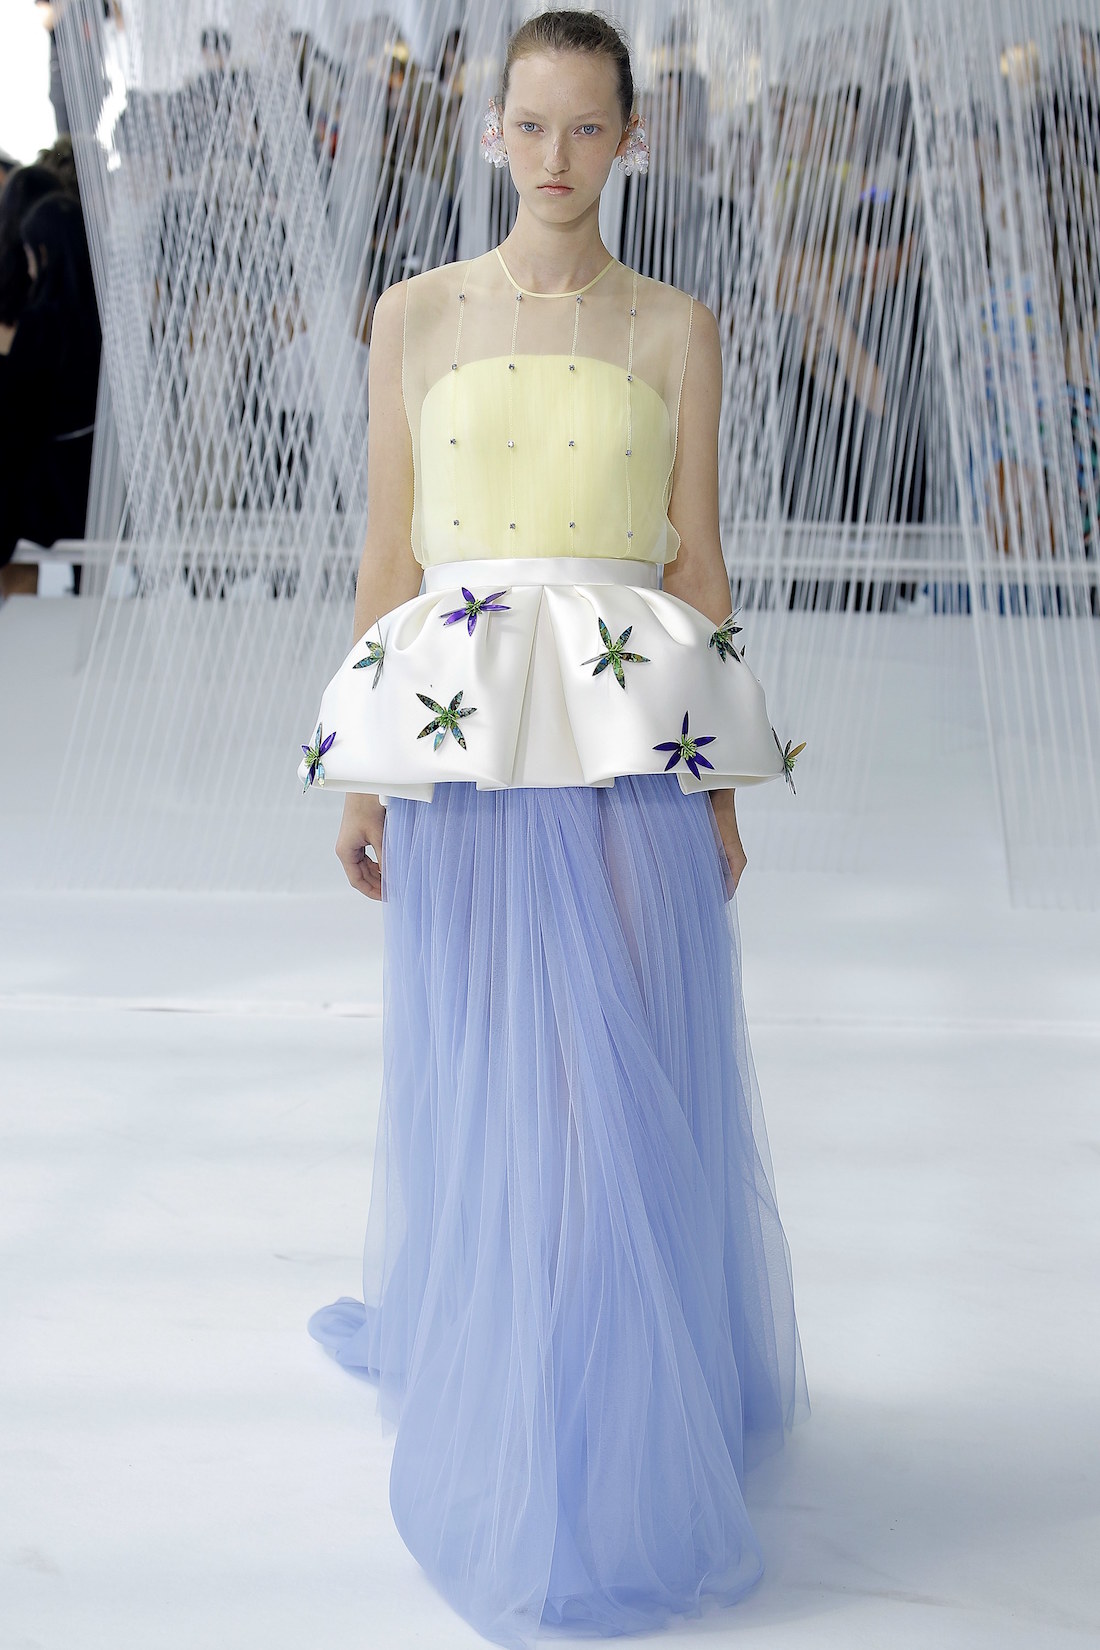 Delpozo Spring 2017 Ready-to-Wear Collection – Project FairyTale